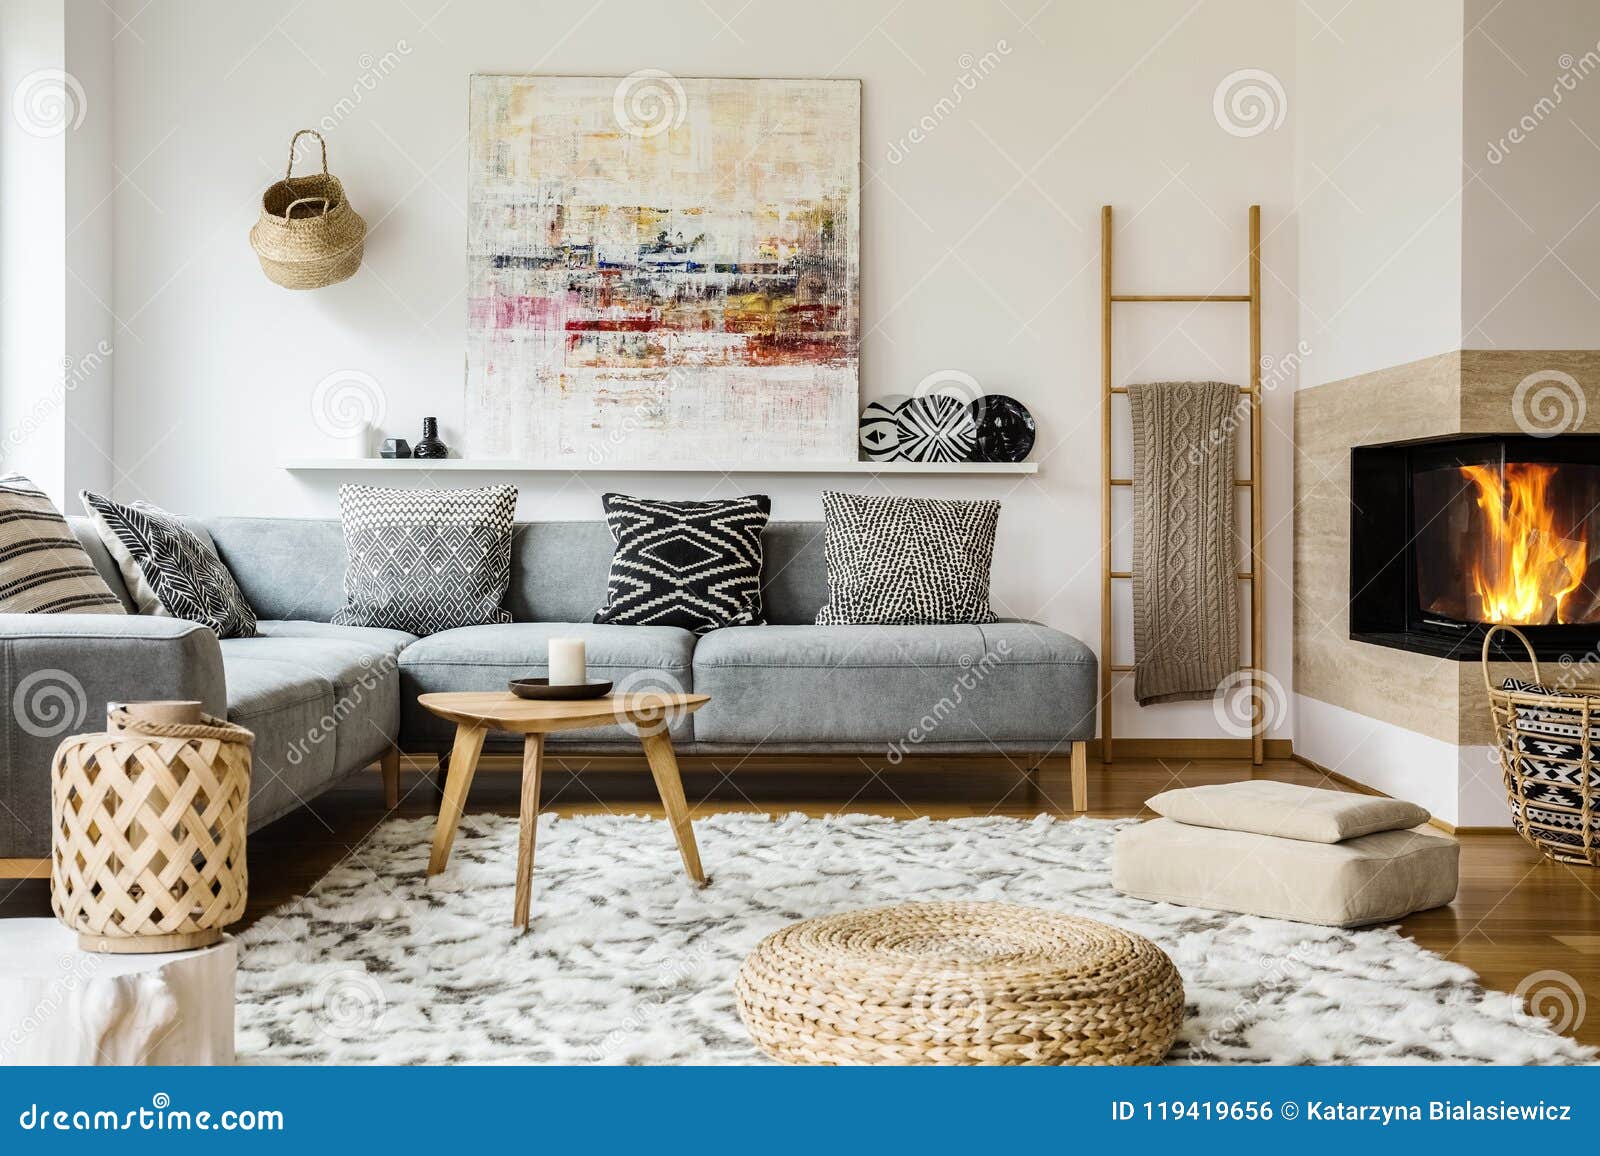 wooden table next to grey corner settee in warm living room interior with painting and fireplace. real photo